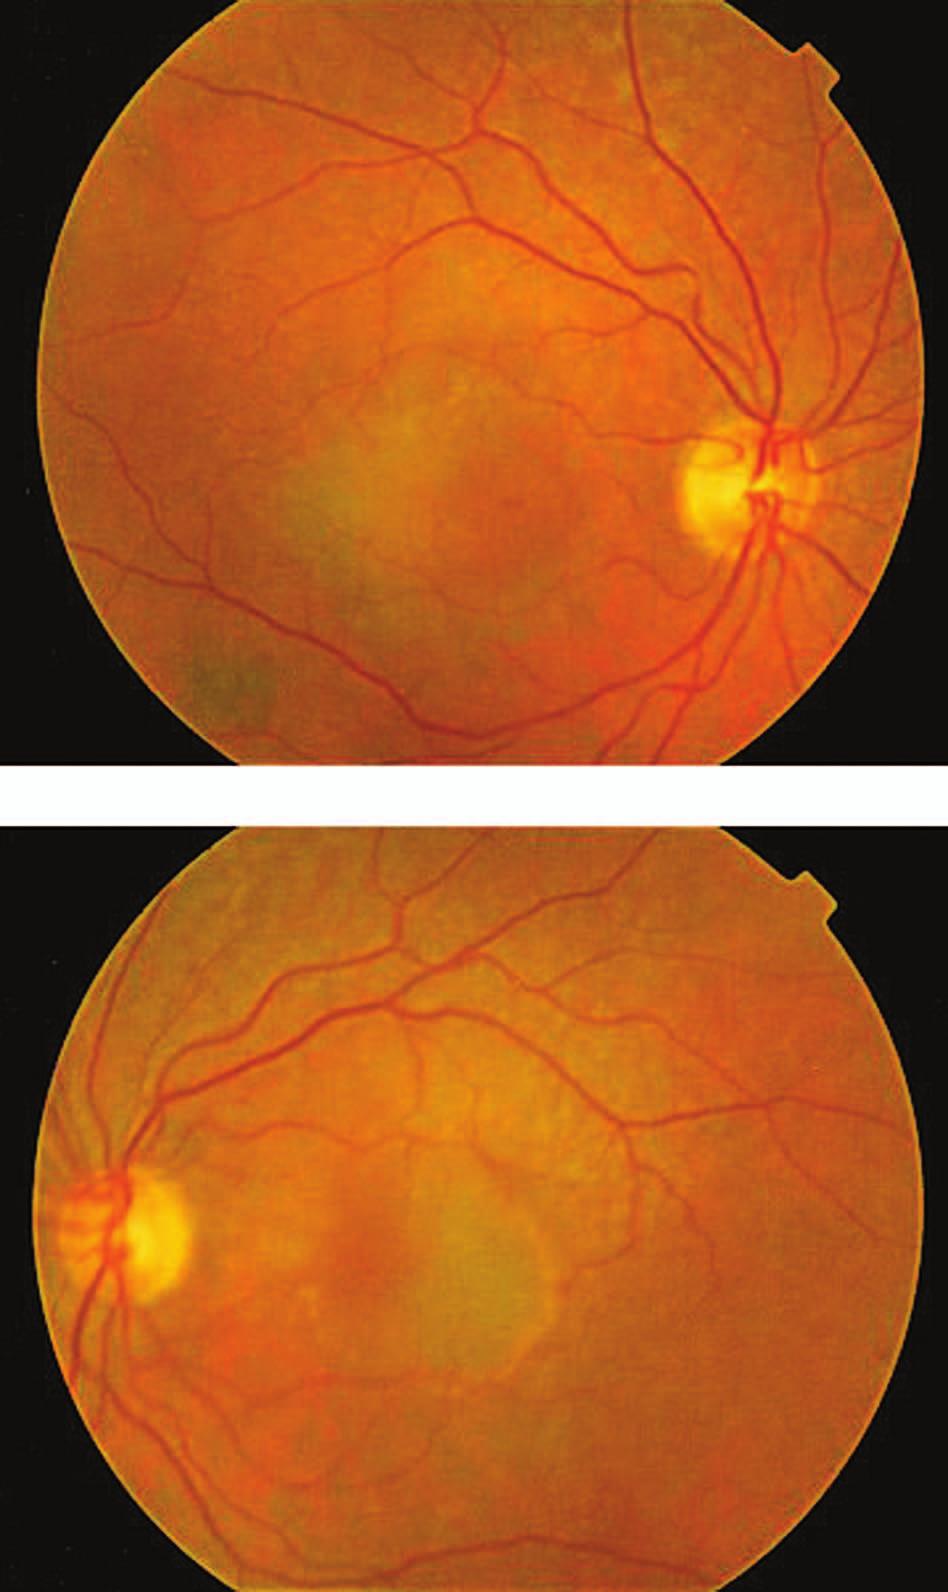 Challenging Case Bilateral Elevated Macular Lesions Section Editor: Alireza Ramezani, MD Case presentation A 65-year-old woman presented with decreased vision in both eyes of 2 months duration.